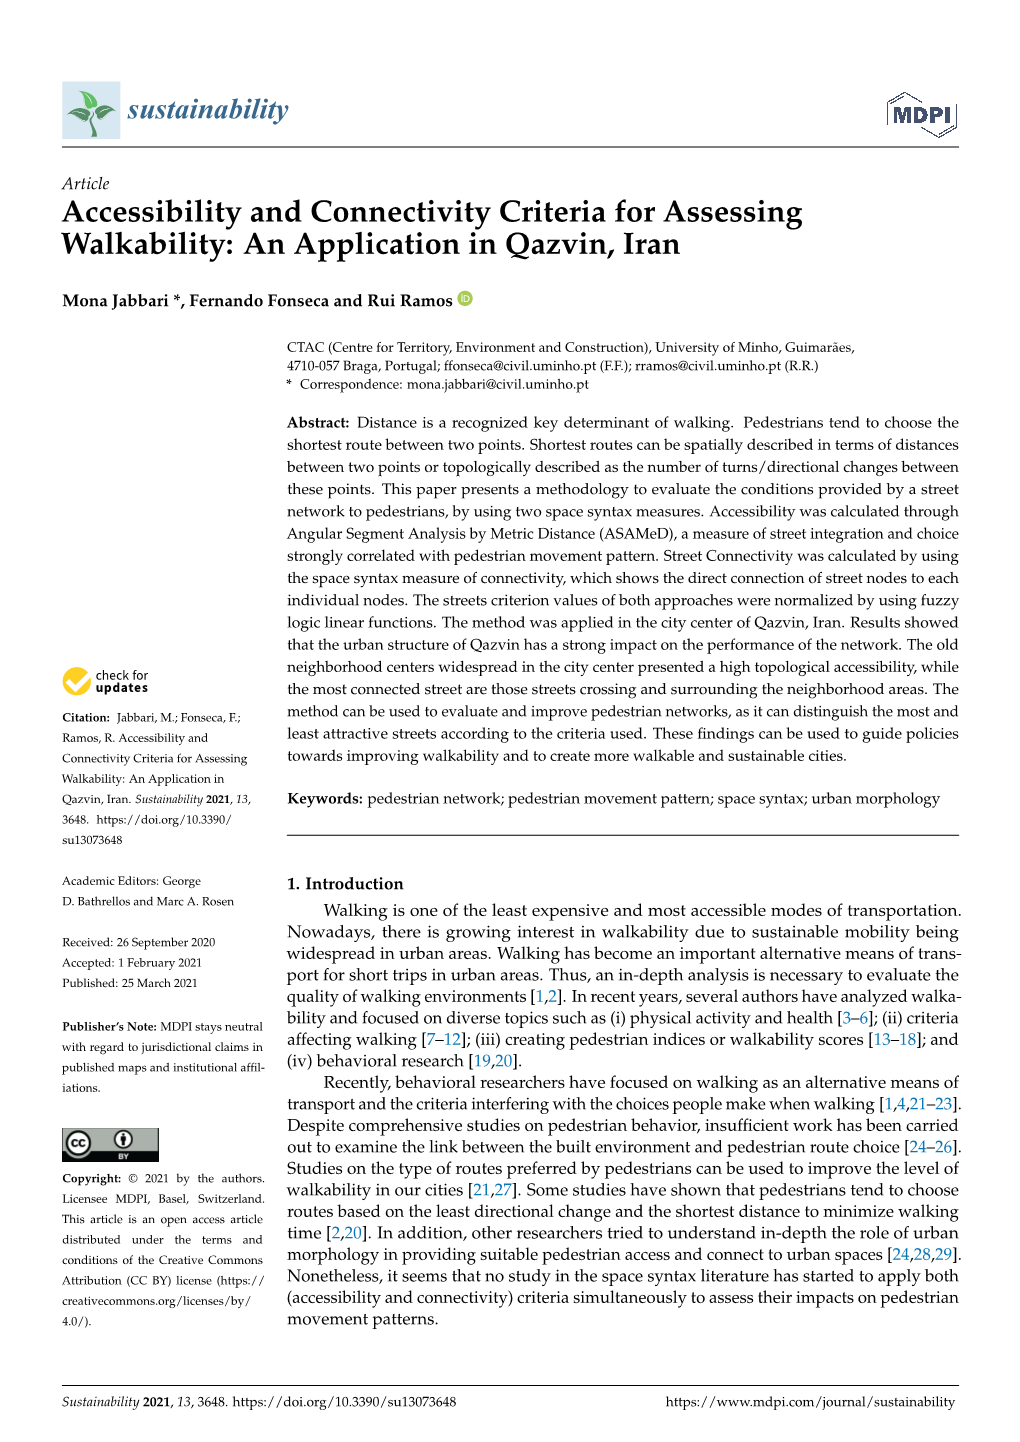 Accessibility and Connectivity Criteria for Assessing Walkability: an Application in Qazvin, Iran